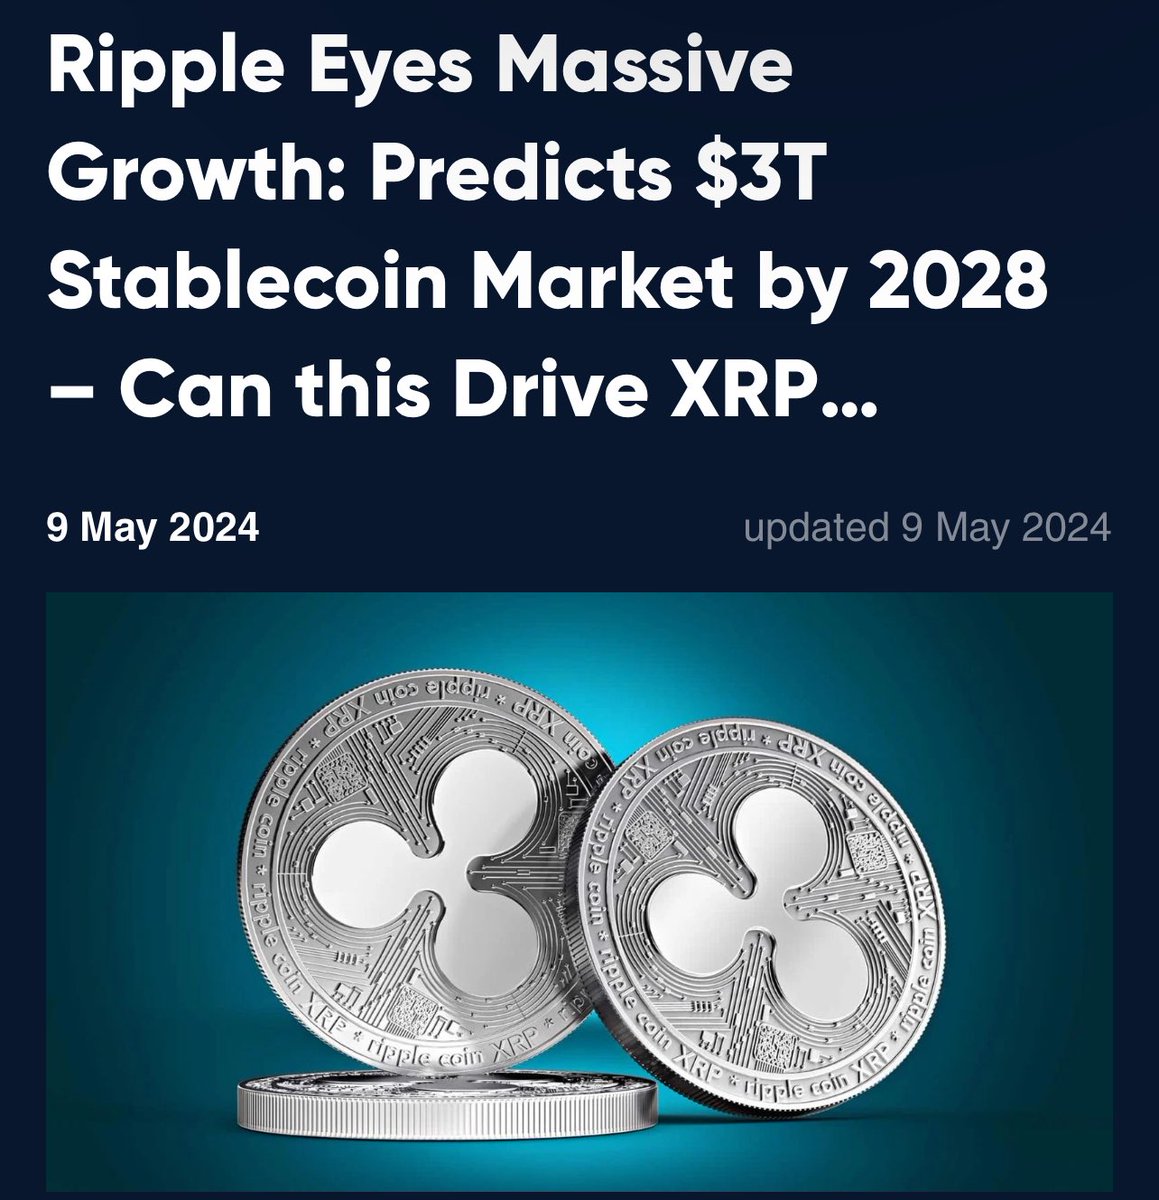 🚨 RIPPLE Announces: Stablecoin  will aim for $3 Trillion by 2028! This puts the price of #XRP AT $62.75! Also means the top defi token on XRPL, CTF token, could be looking at a huge pump in the short term!

CTF token could realistically jump from $0.95 to $374.25 per token if it…